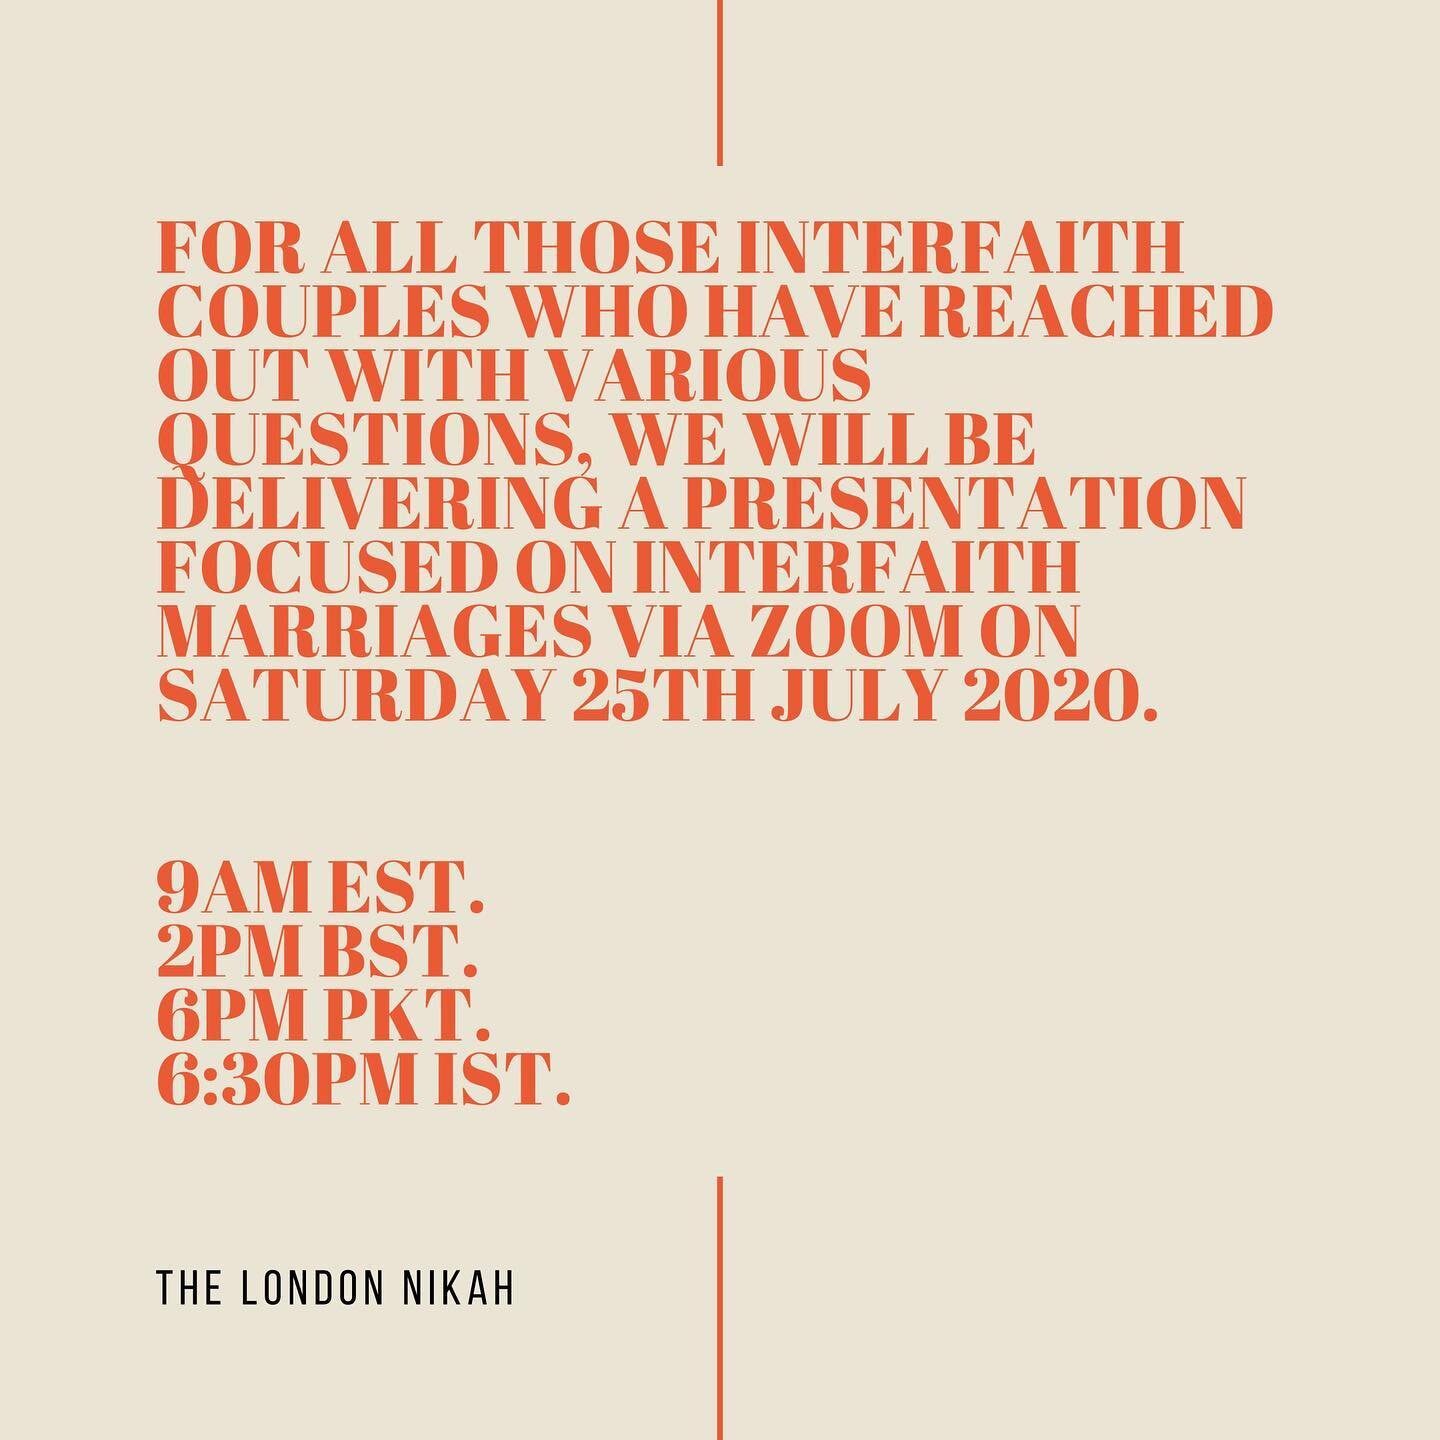 The London Nikah will be holding their first presentation focused on interfaith marriages via Zoom on Saturday 25 July.

Register your interest via the link in the bio!

Note: registration will close on Wednesday 22 July at 7pm EST.